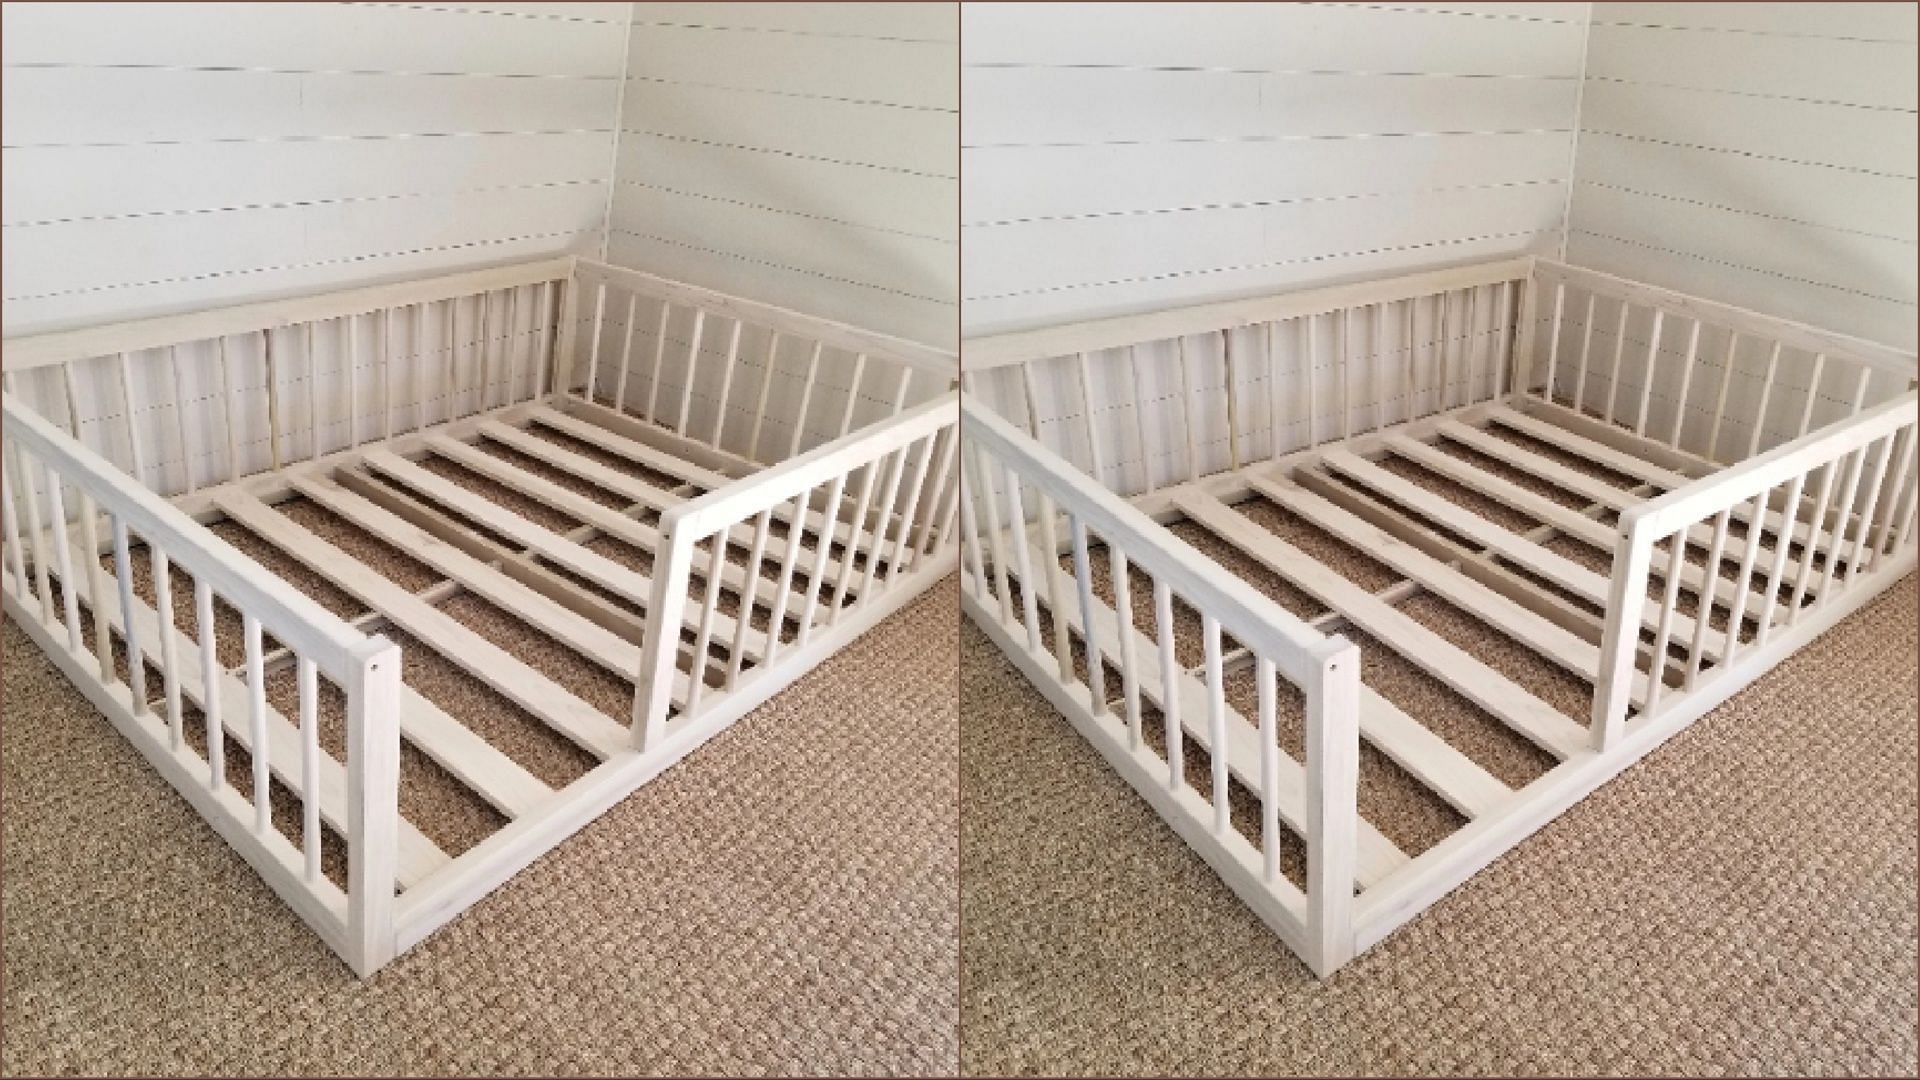 The recalled Zipadee Kids Convertible House Bed Frame&#039; and &#039;Montessori Floor Beds should be disposed of immediately (Image via CPSC)